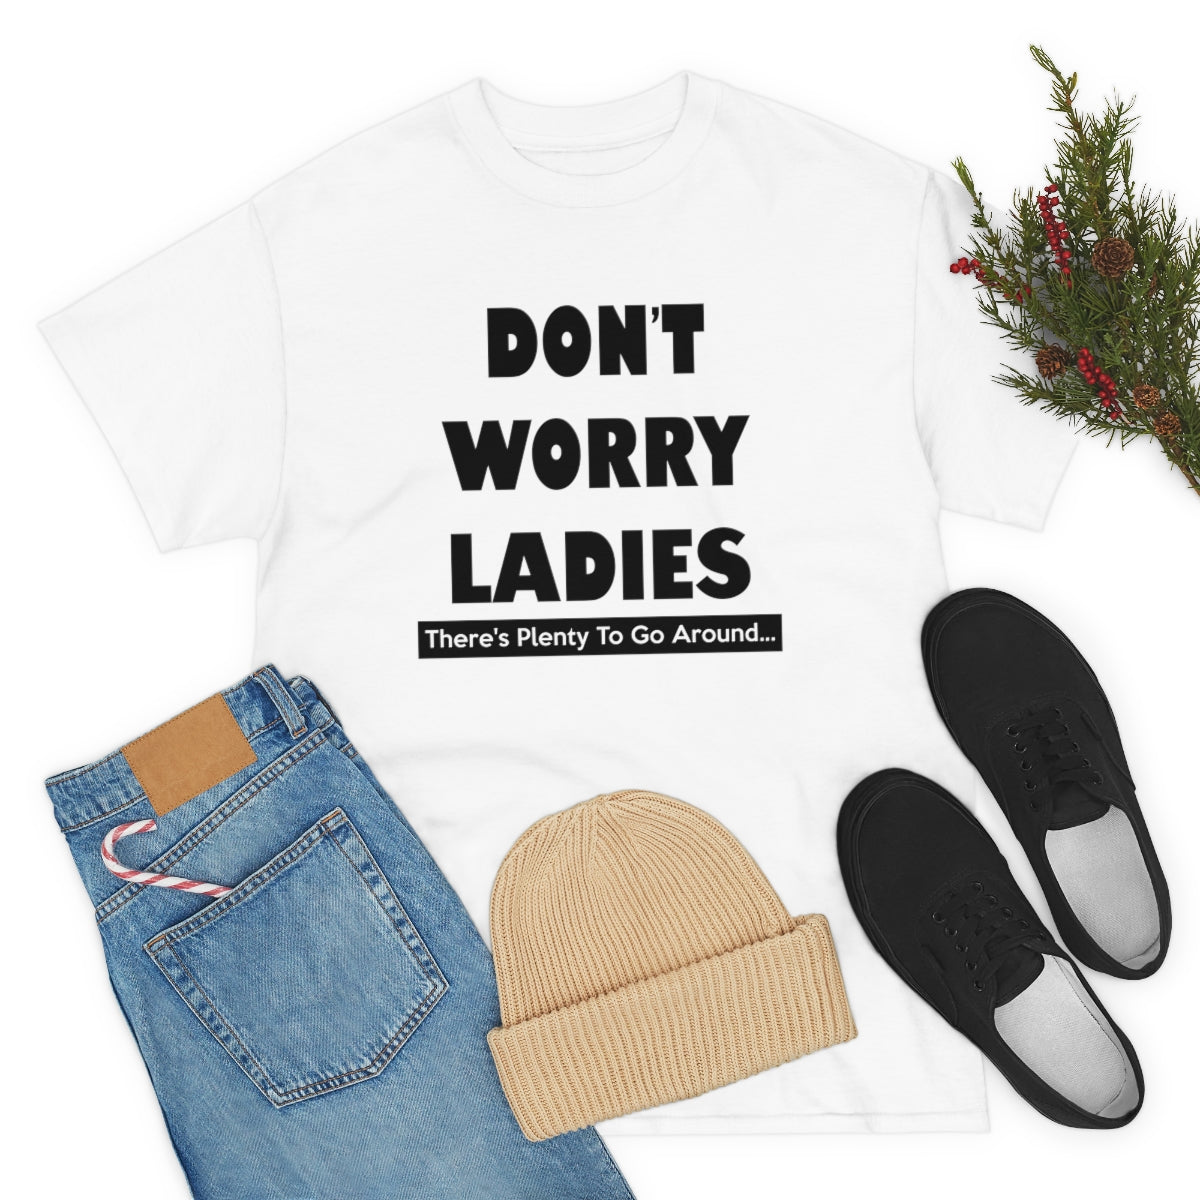 DON'T WORRY LADIES T-SHIRT